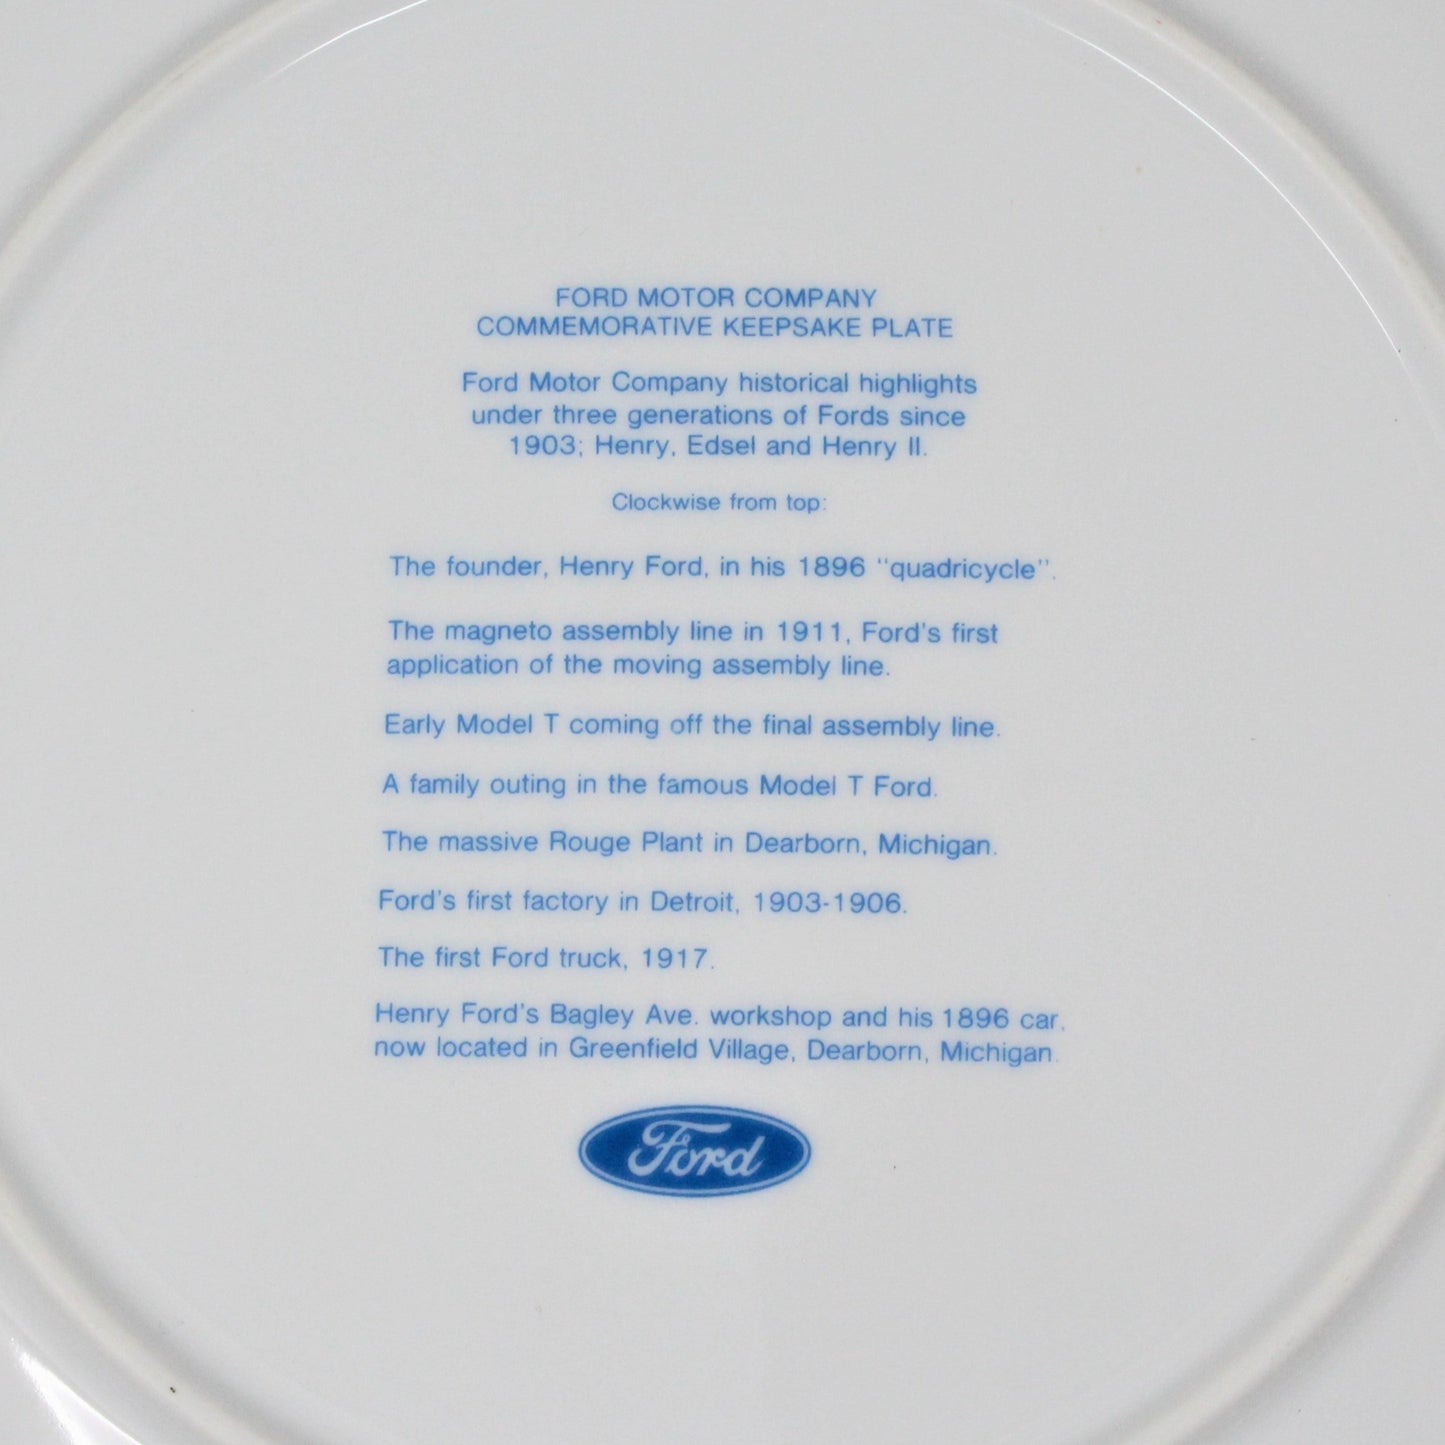 Decorative Plate, Ford Motor Co, Commemorative Collectible, Vintage